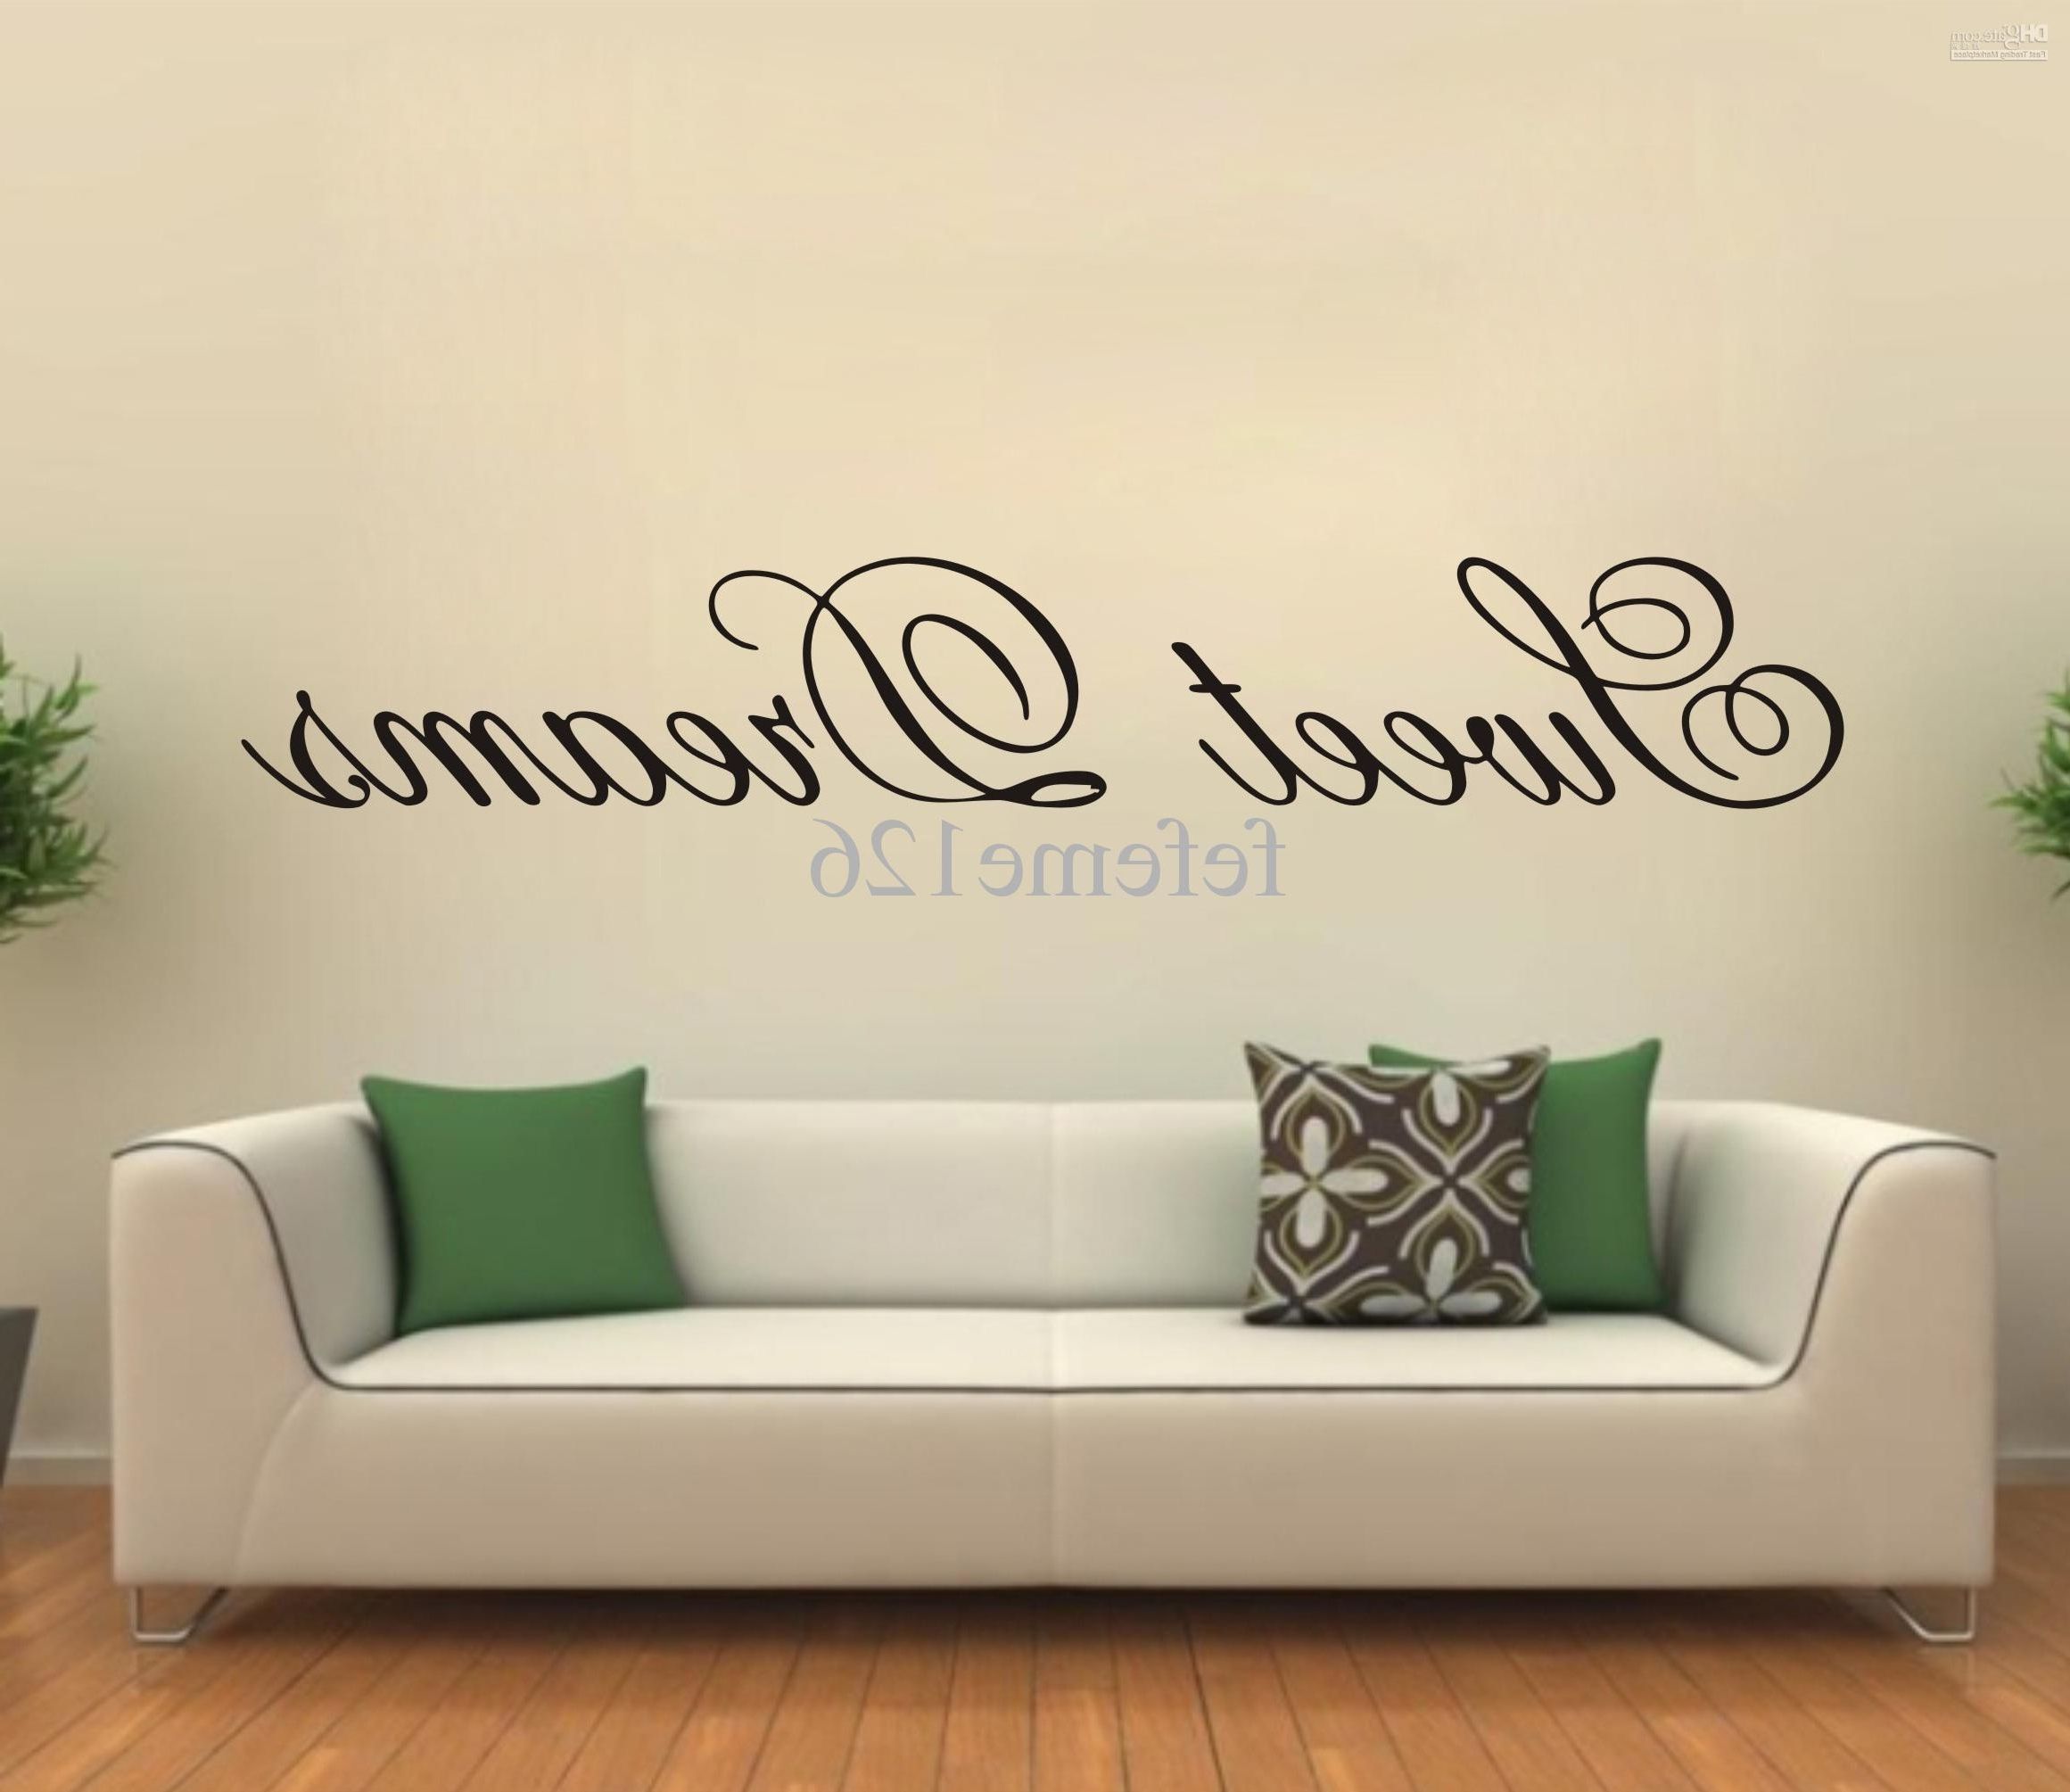 Most Up To Date Decorative 3d Wall Art Stickers Inside Modern Wall Sticker Sweet Dreams Vinyl Art Mural Living Room (View 15 of 15)